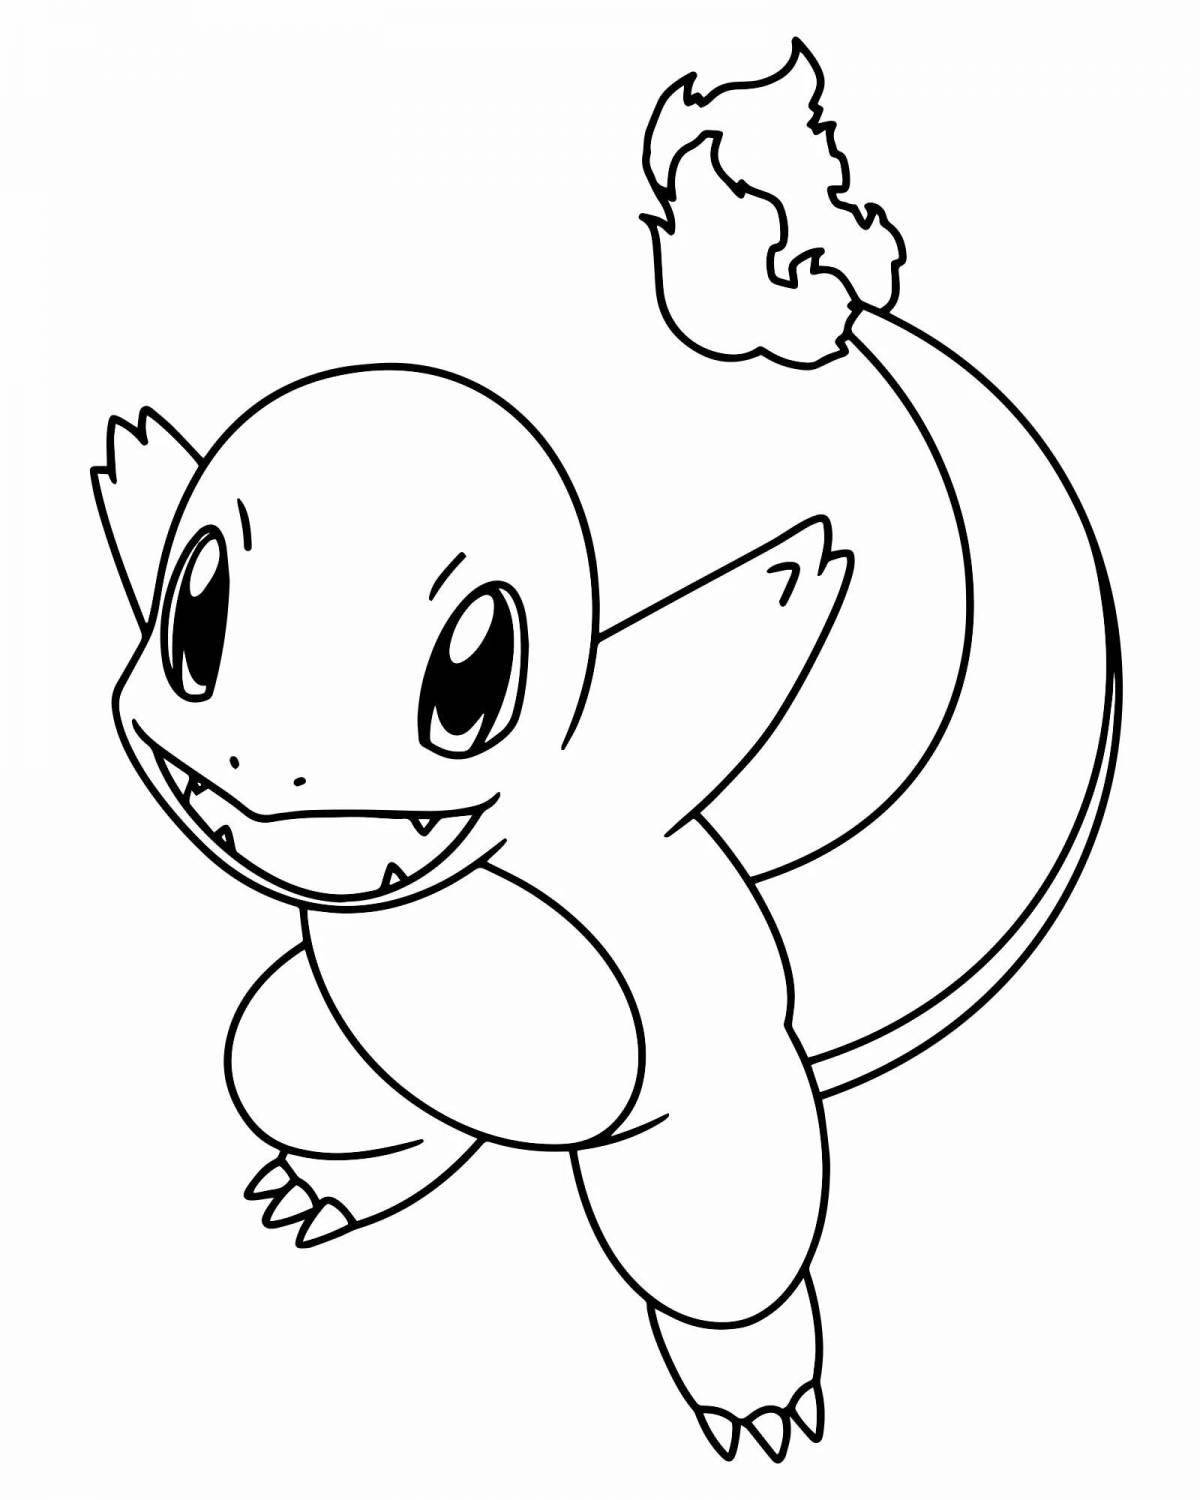 Animated pokemon squirtle coloring page